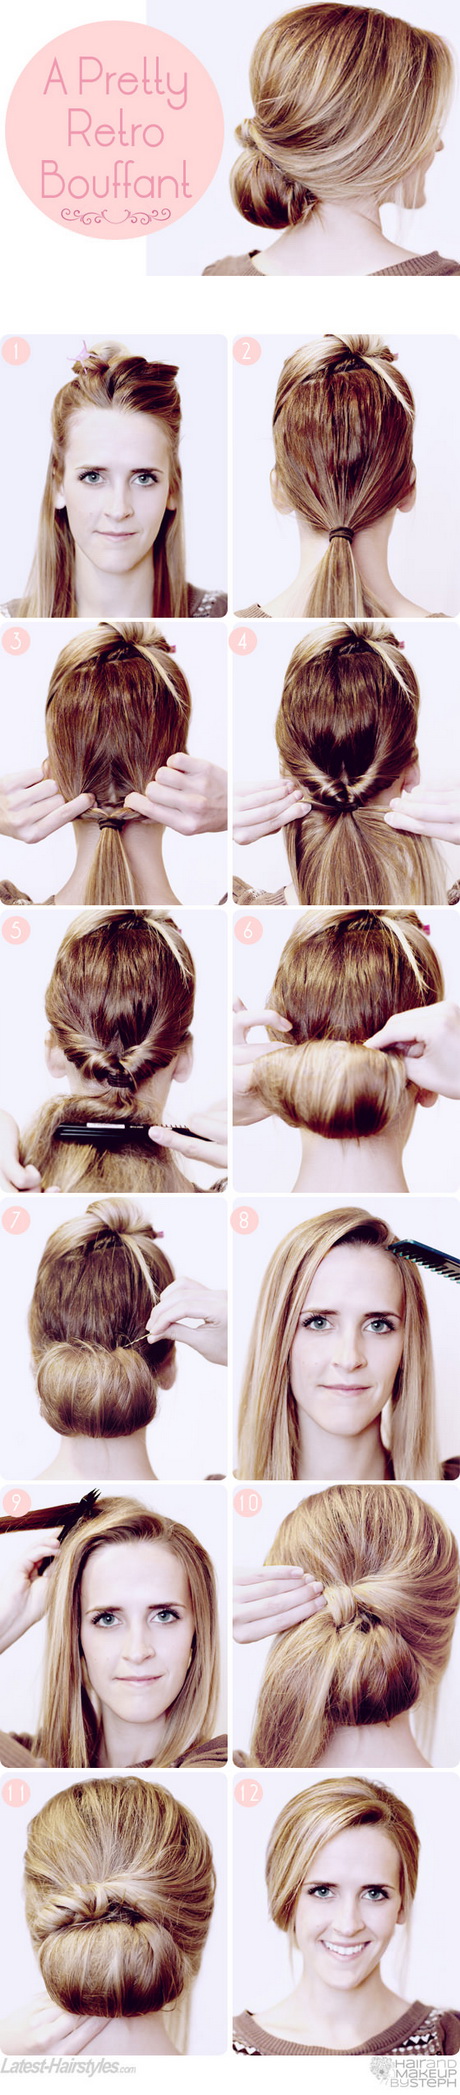 Flechtfrisuren step by step flechtfrisuren-step-by-step-77-2